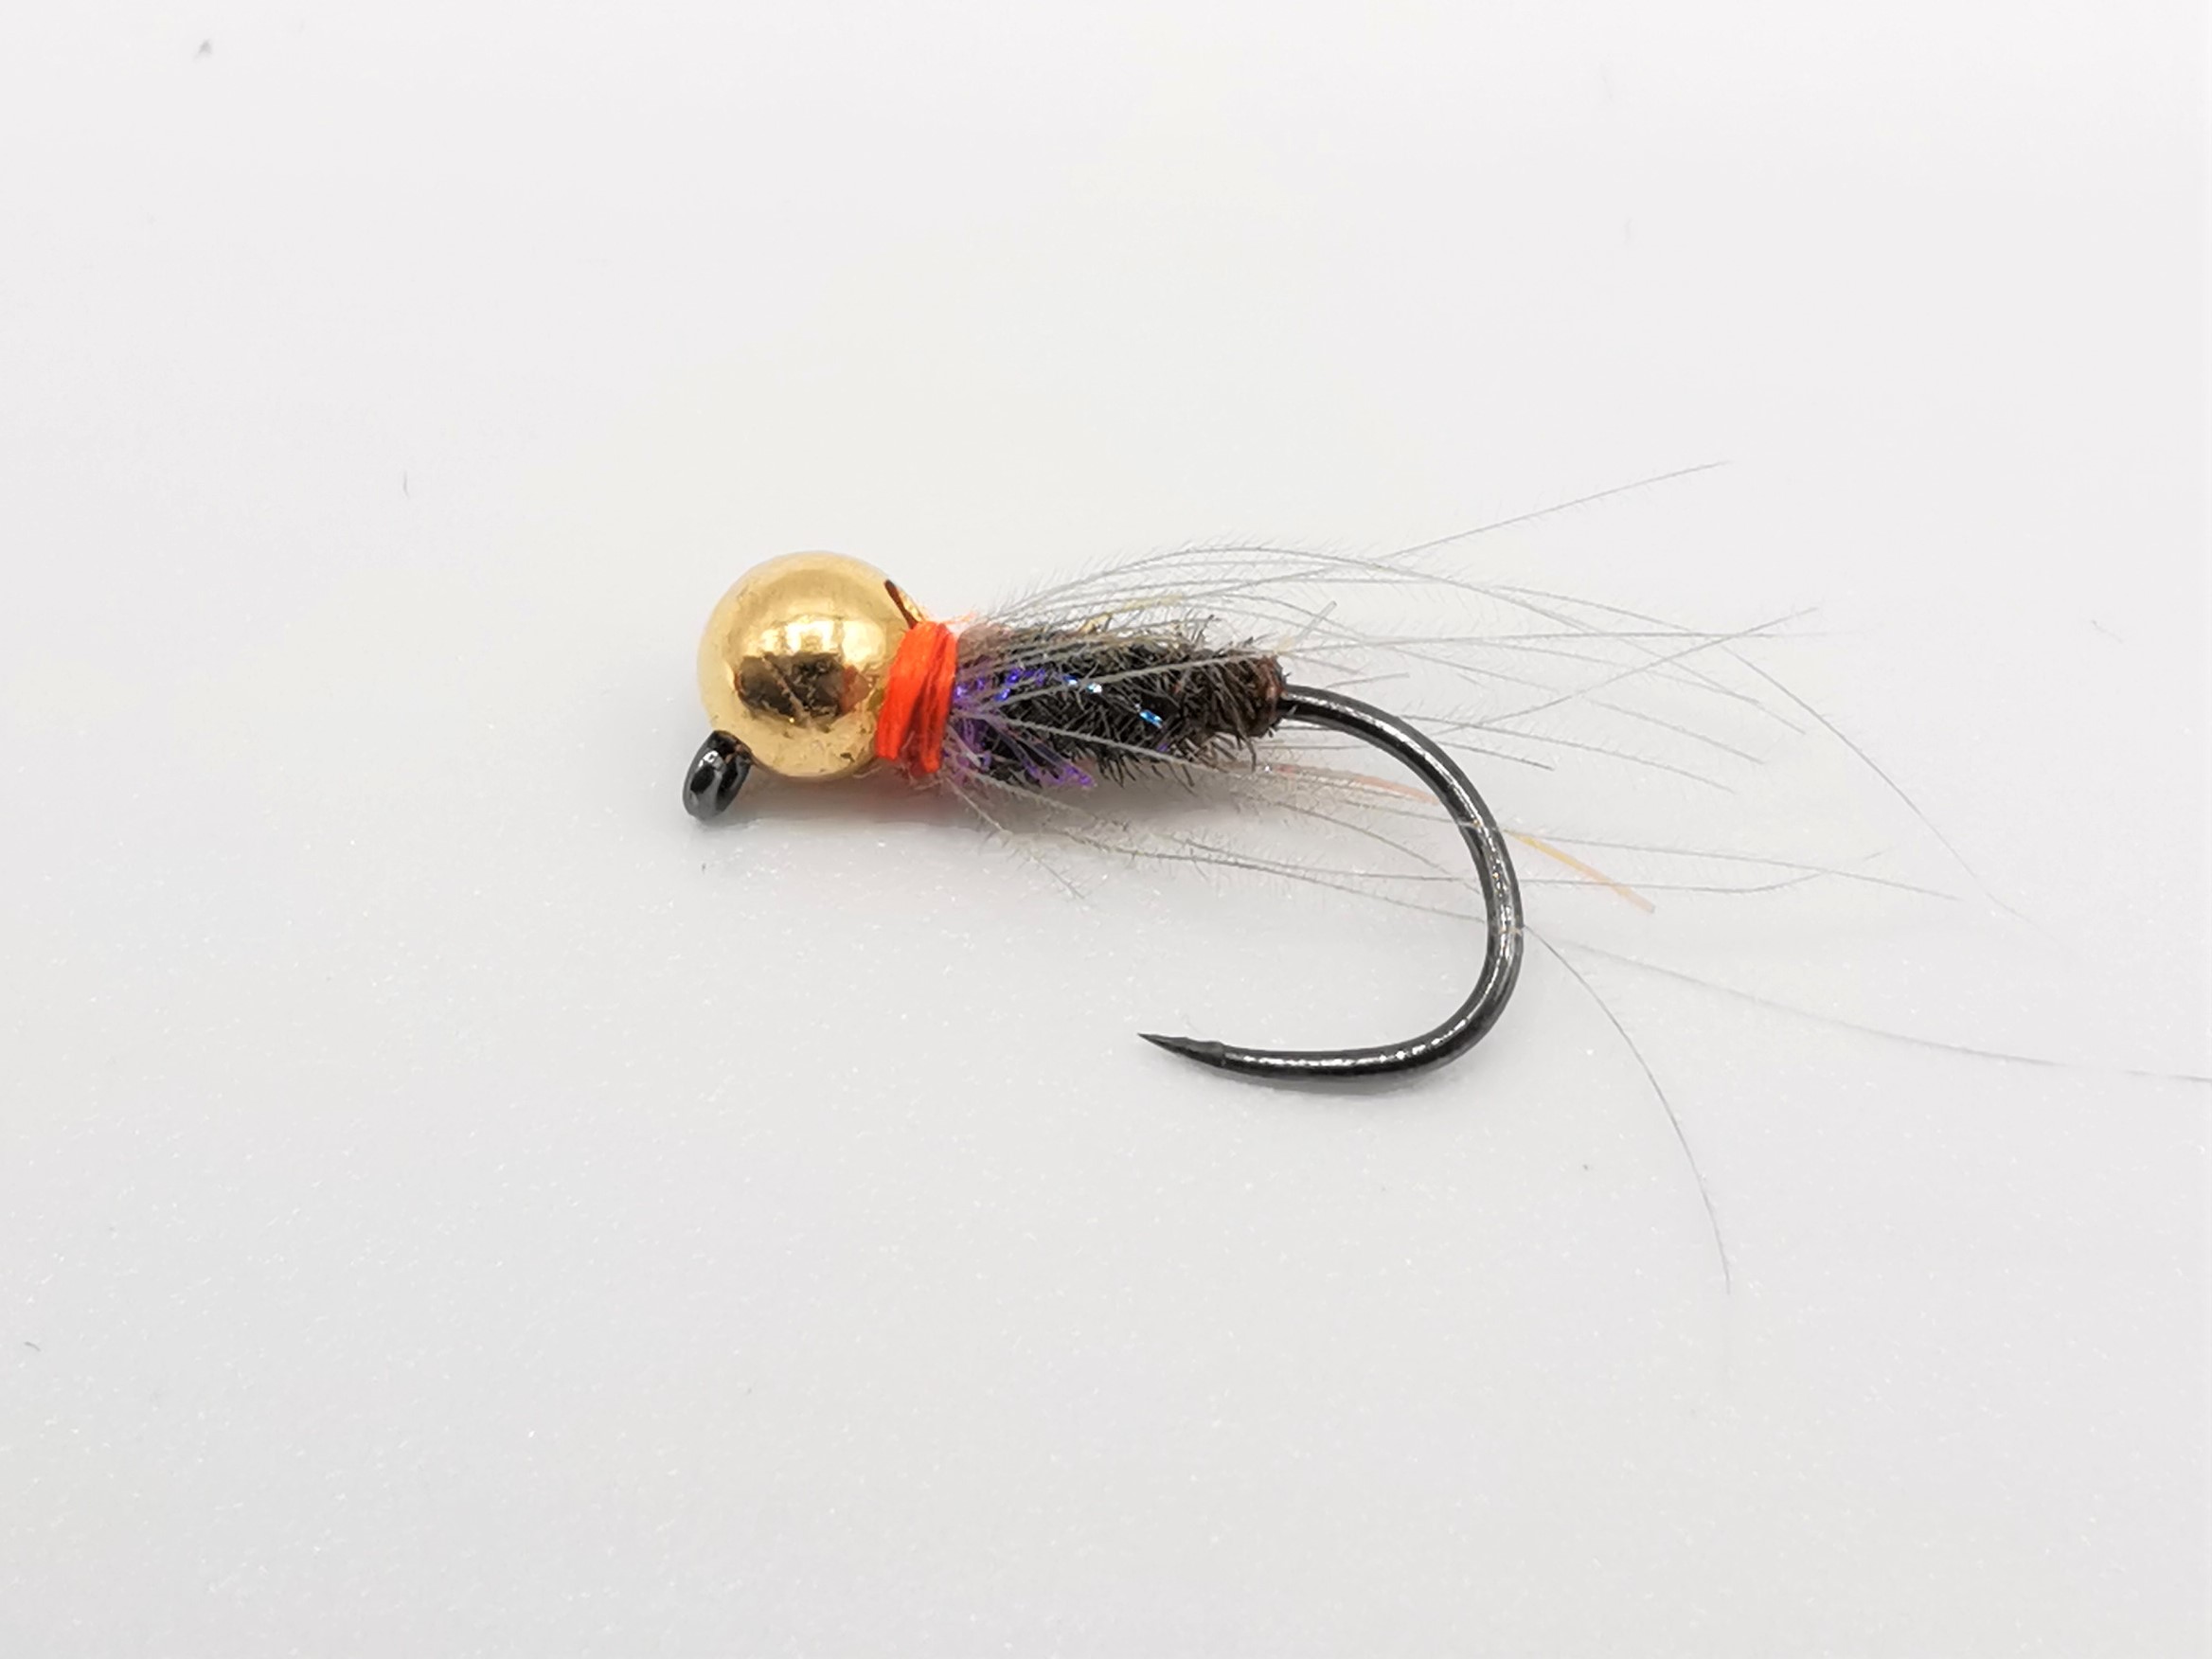 pack of 3 size 16 barbless jig hook. March brown perdigon Euro nymph. 